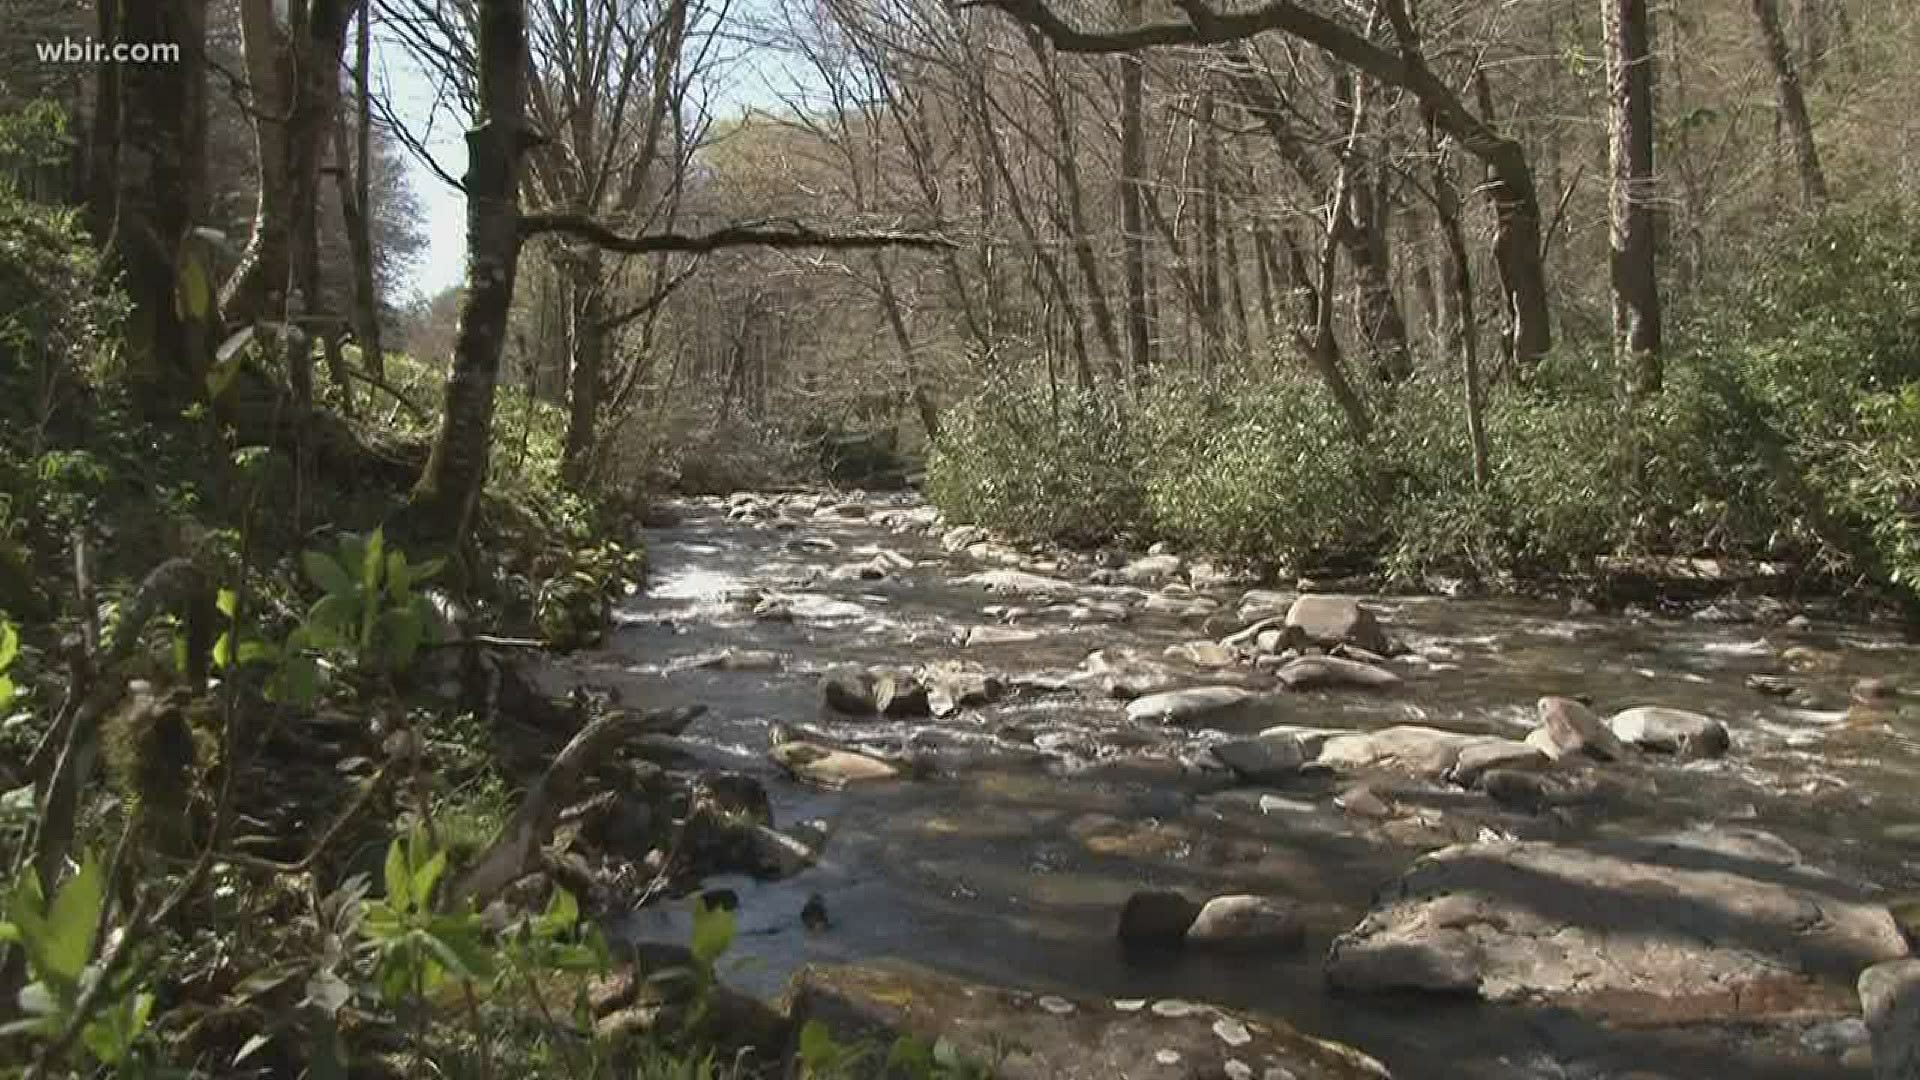 10News reporter Grace King was in Newfound Gap today and has the details.